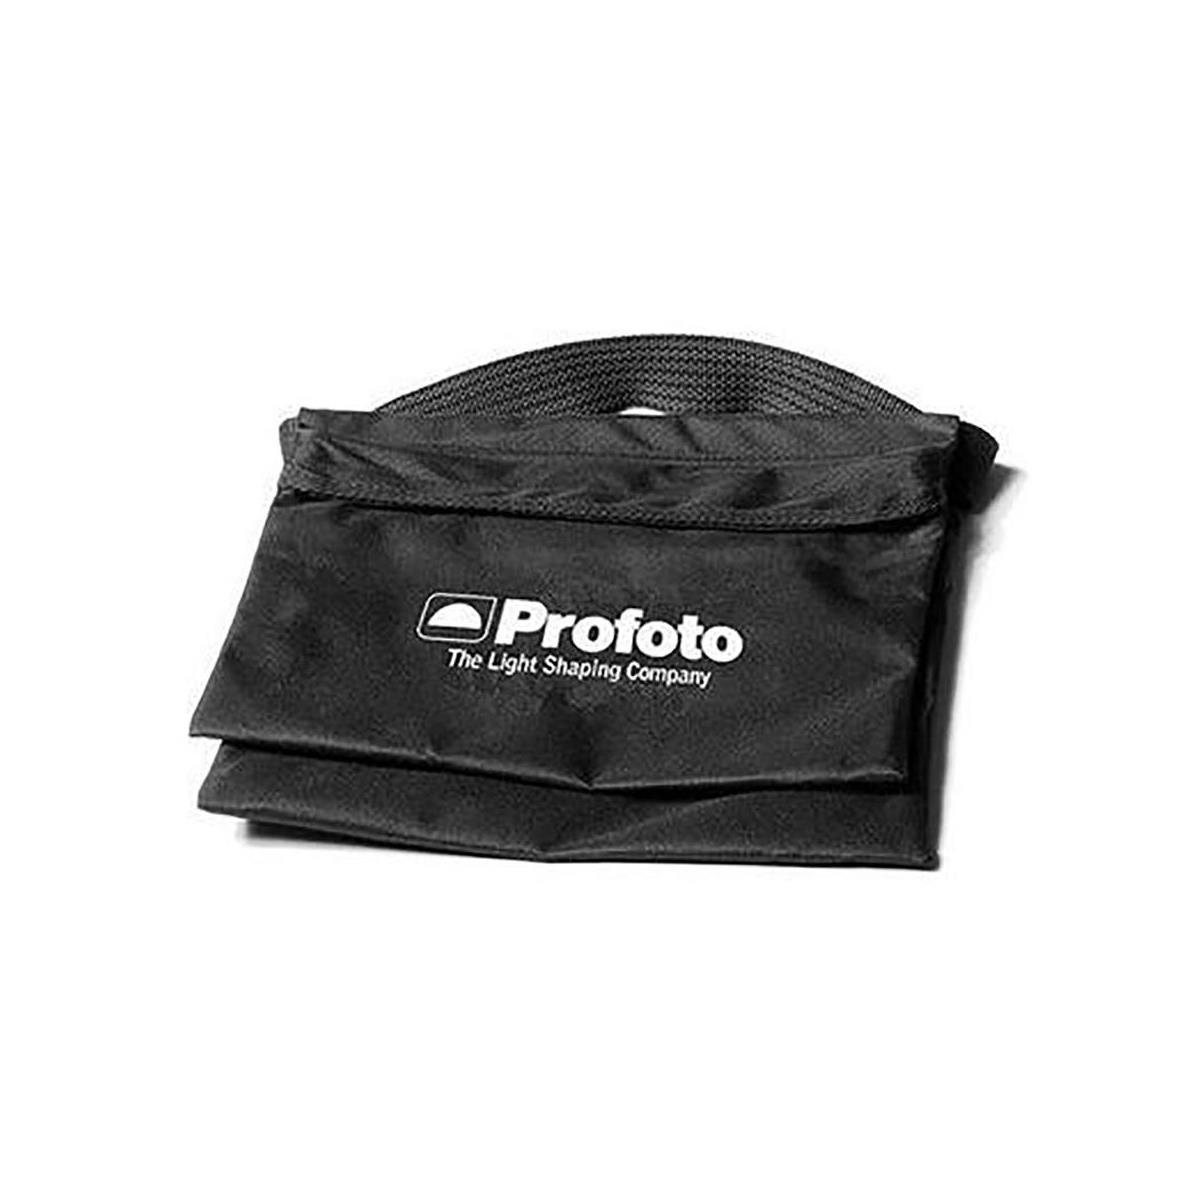 Photos - Other for studios Profoto Sand Bag, Holds 15 Lbs 100297 